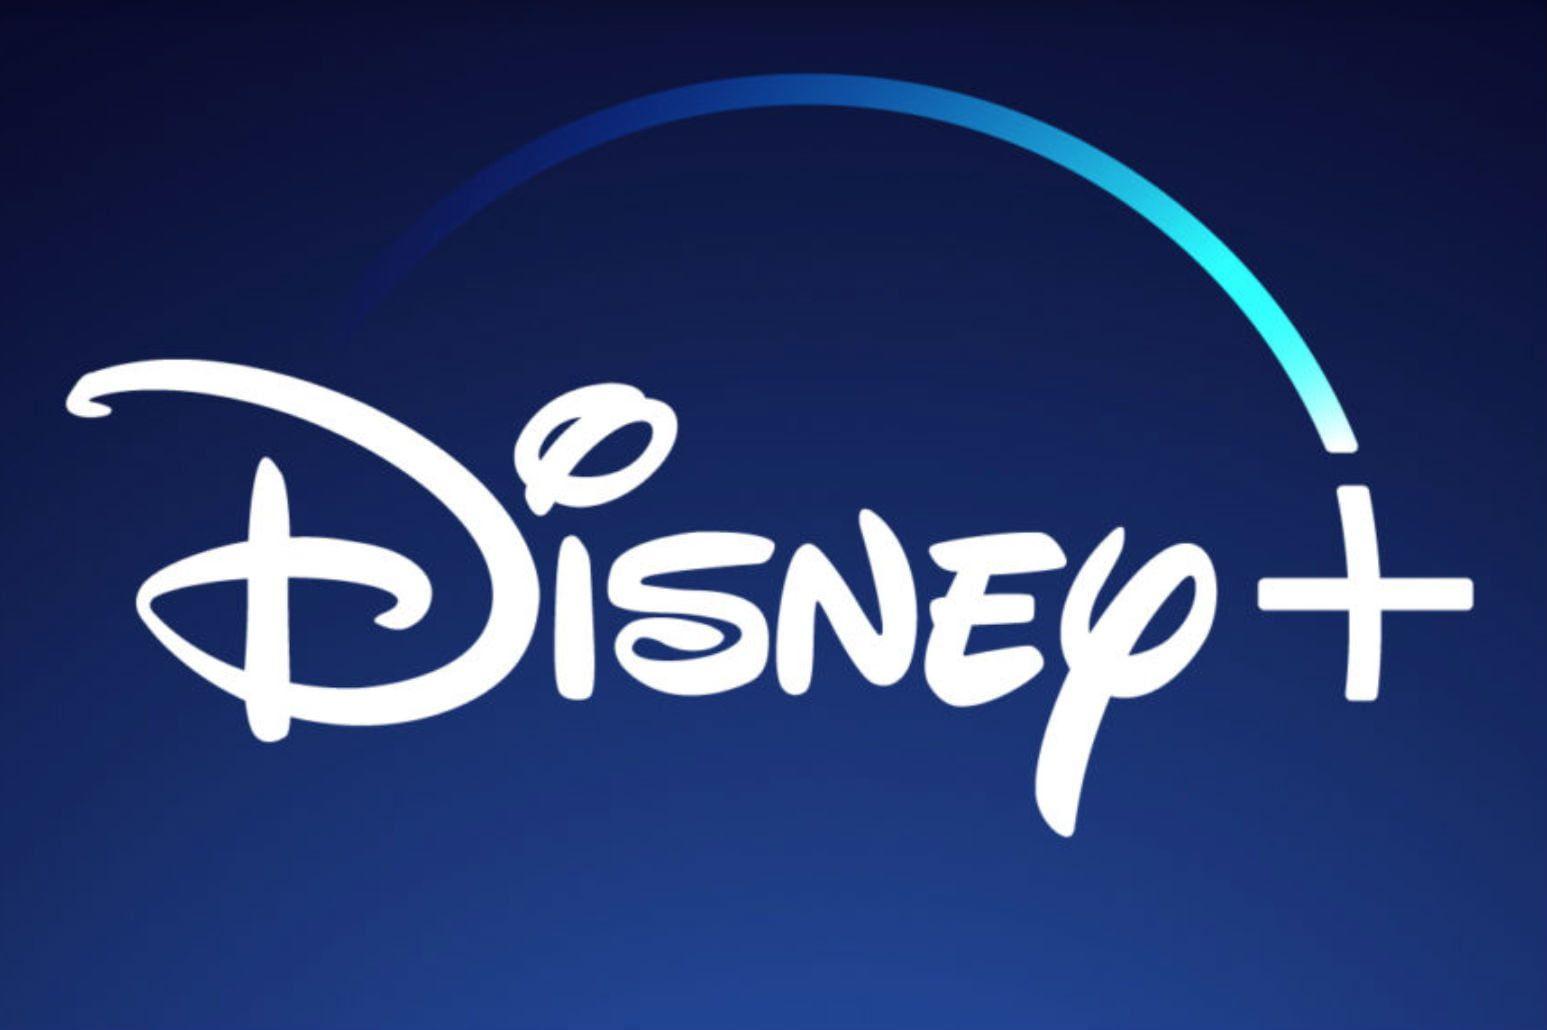 Disney Fast Play Logo - Disney Plus: Everything We Know About Disney's Streaming Service ...